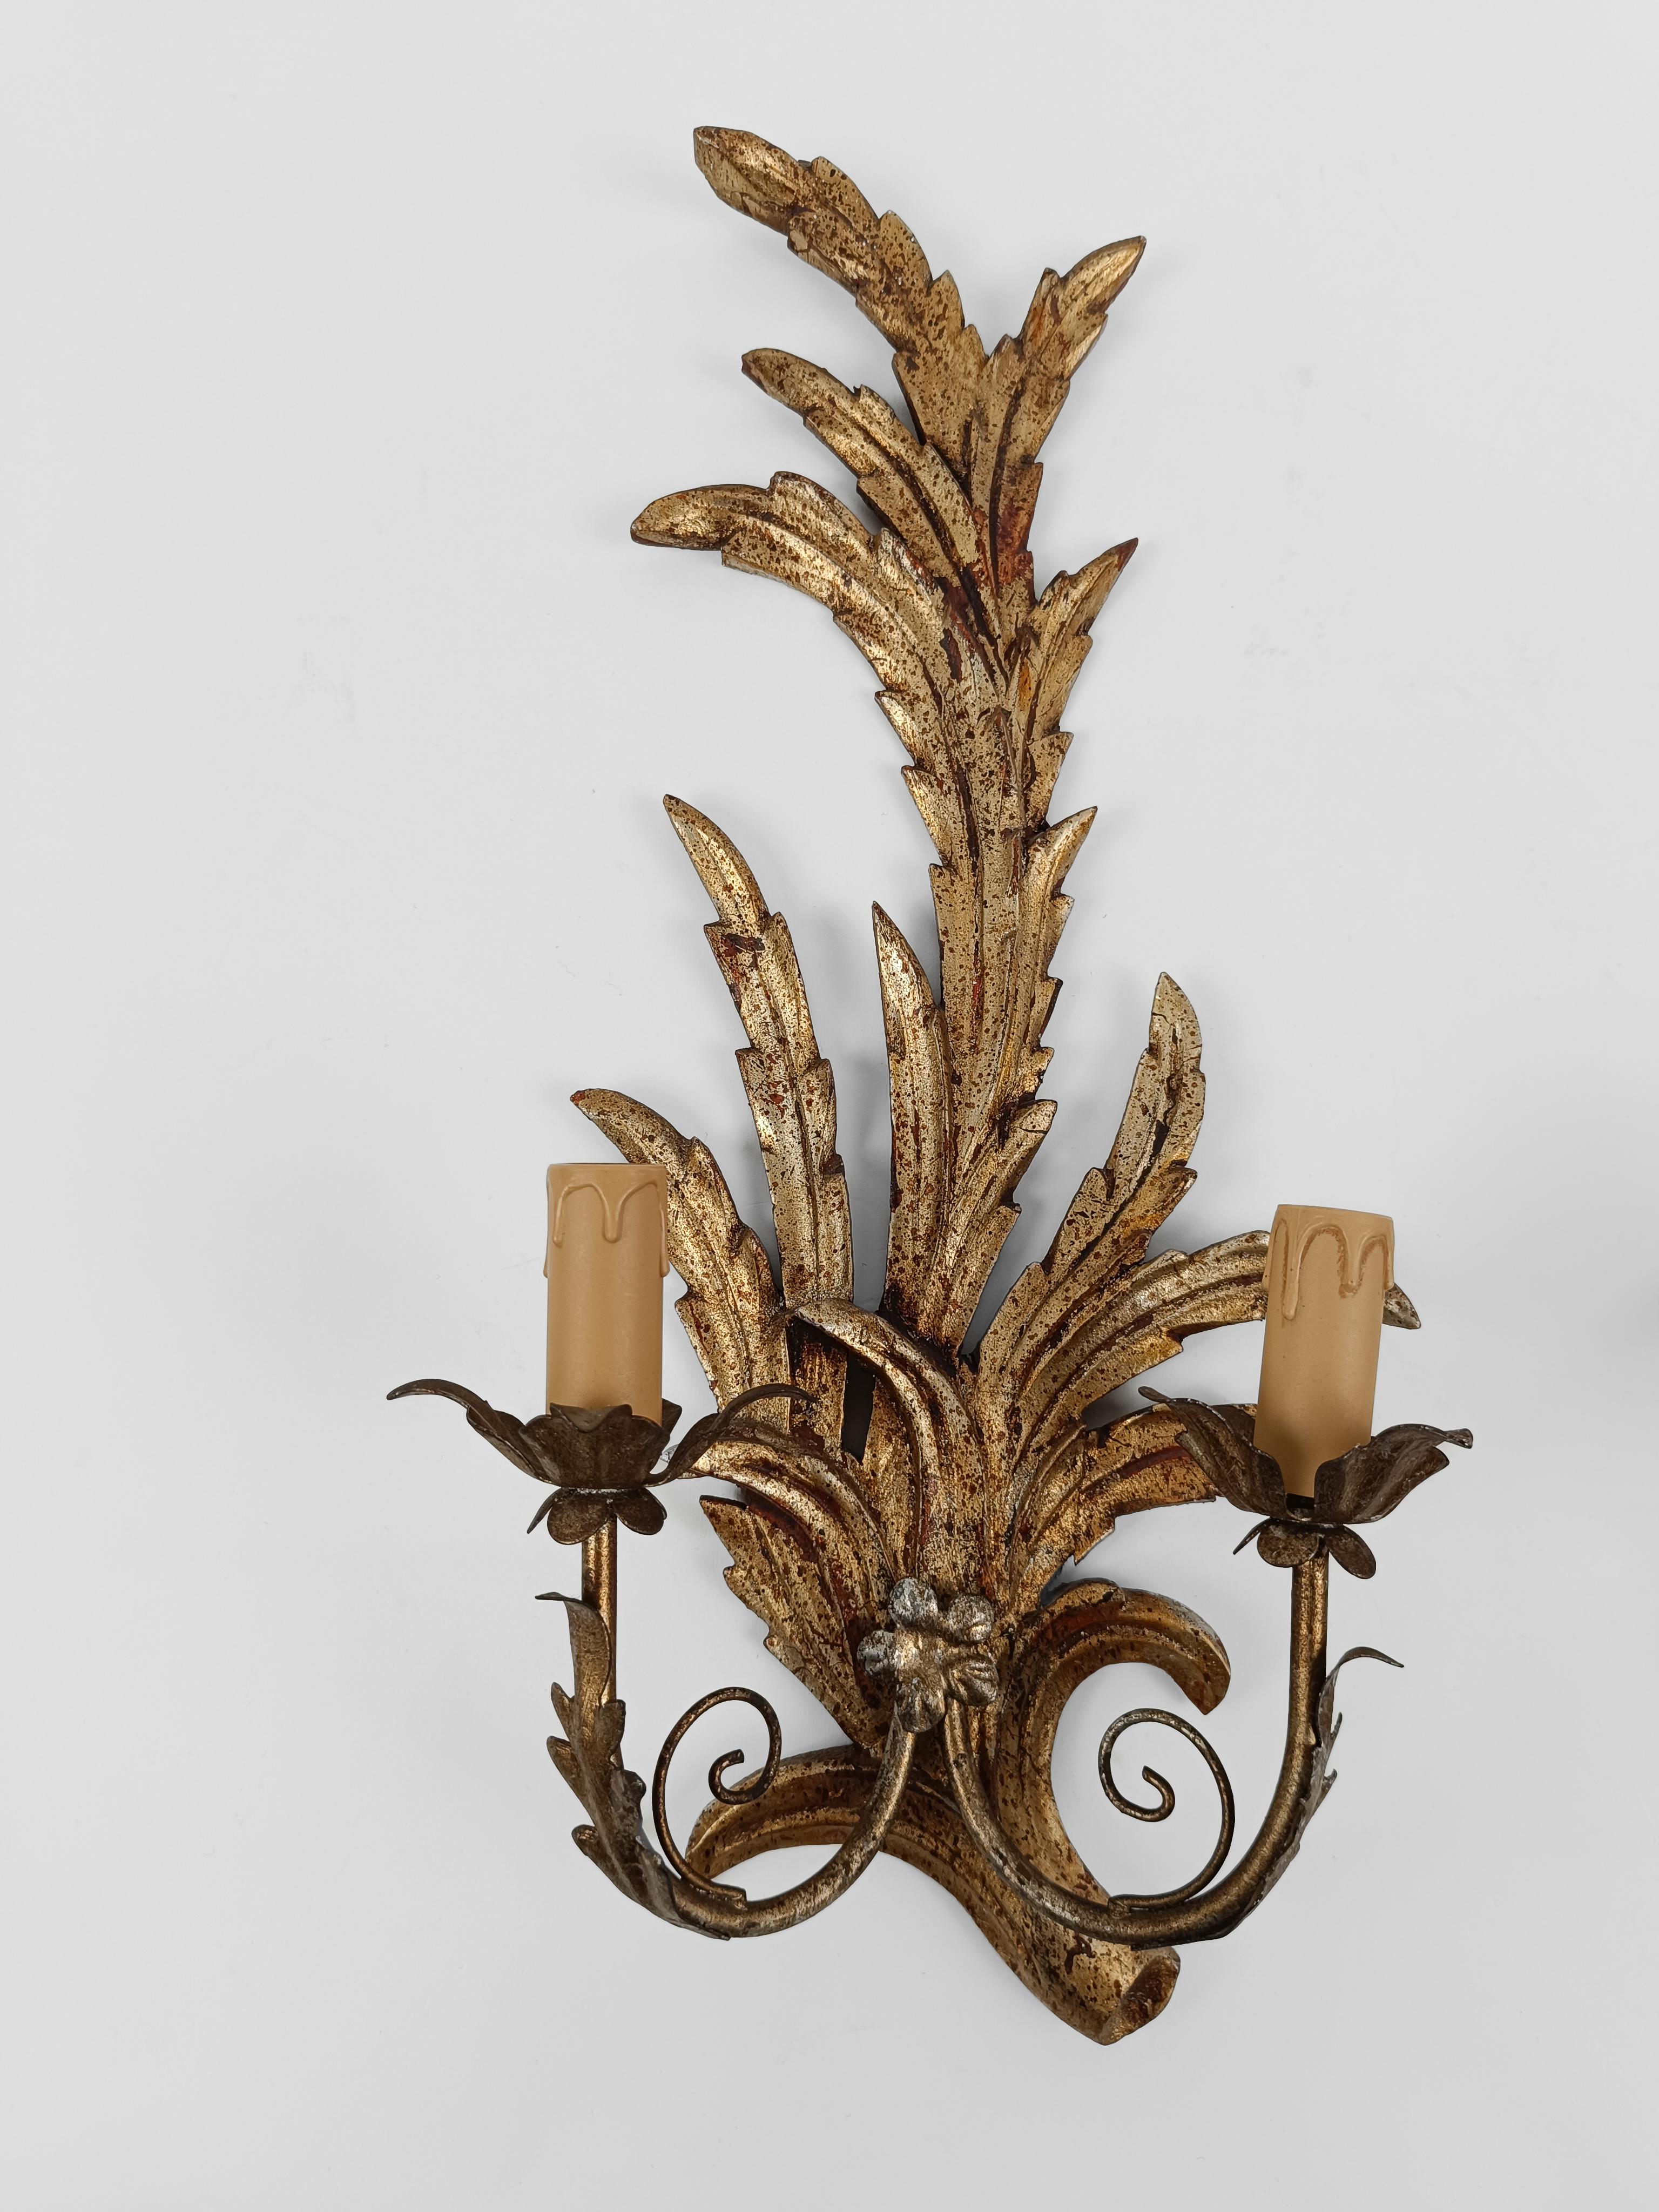 A pair of sconces made in Italy during the mid 20th century but in the Rococo style.

The hand-carved lime wood structure with foliate motifs is gilded with the ancient gold leaf technique.

serrated leaves reminiscent of palm leaves that transform